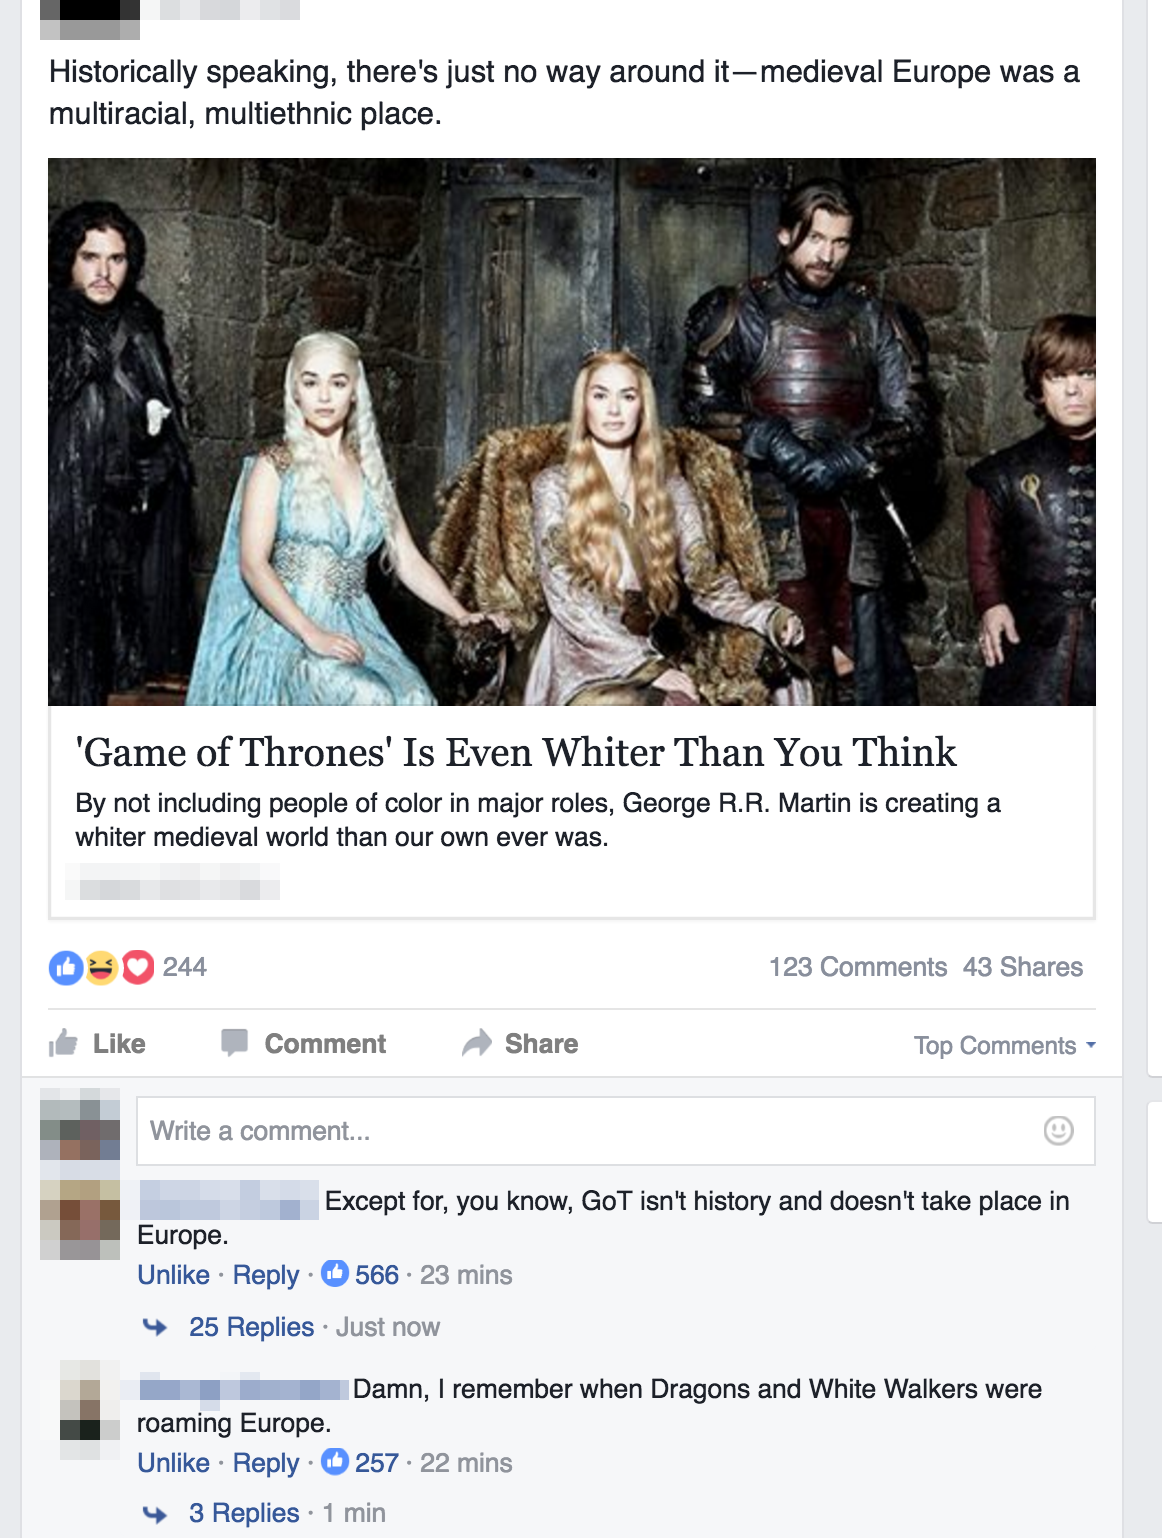 The fictional GoT universe and its history are too white.